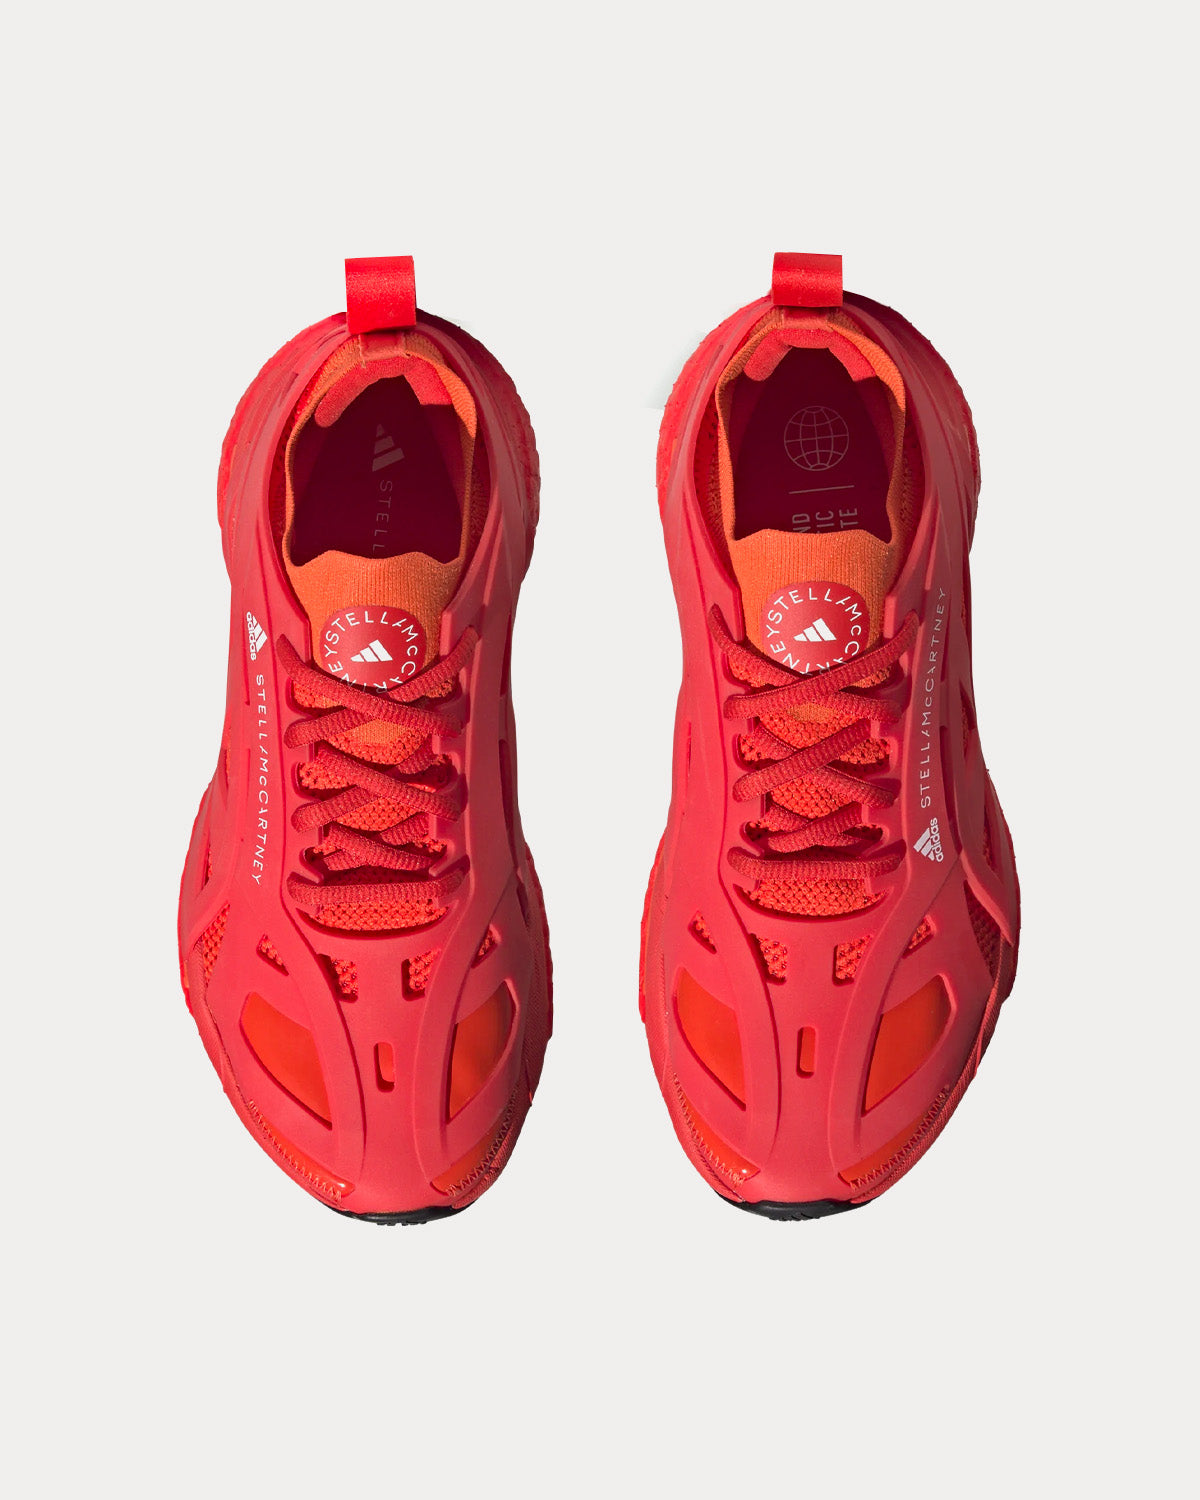 Adidas X Stella McCartney - Solarglide Active Red / Active Orange / Active Red Running Shoes